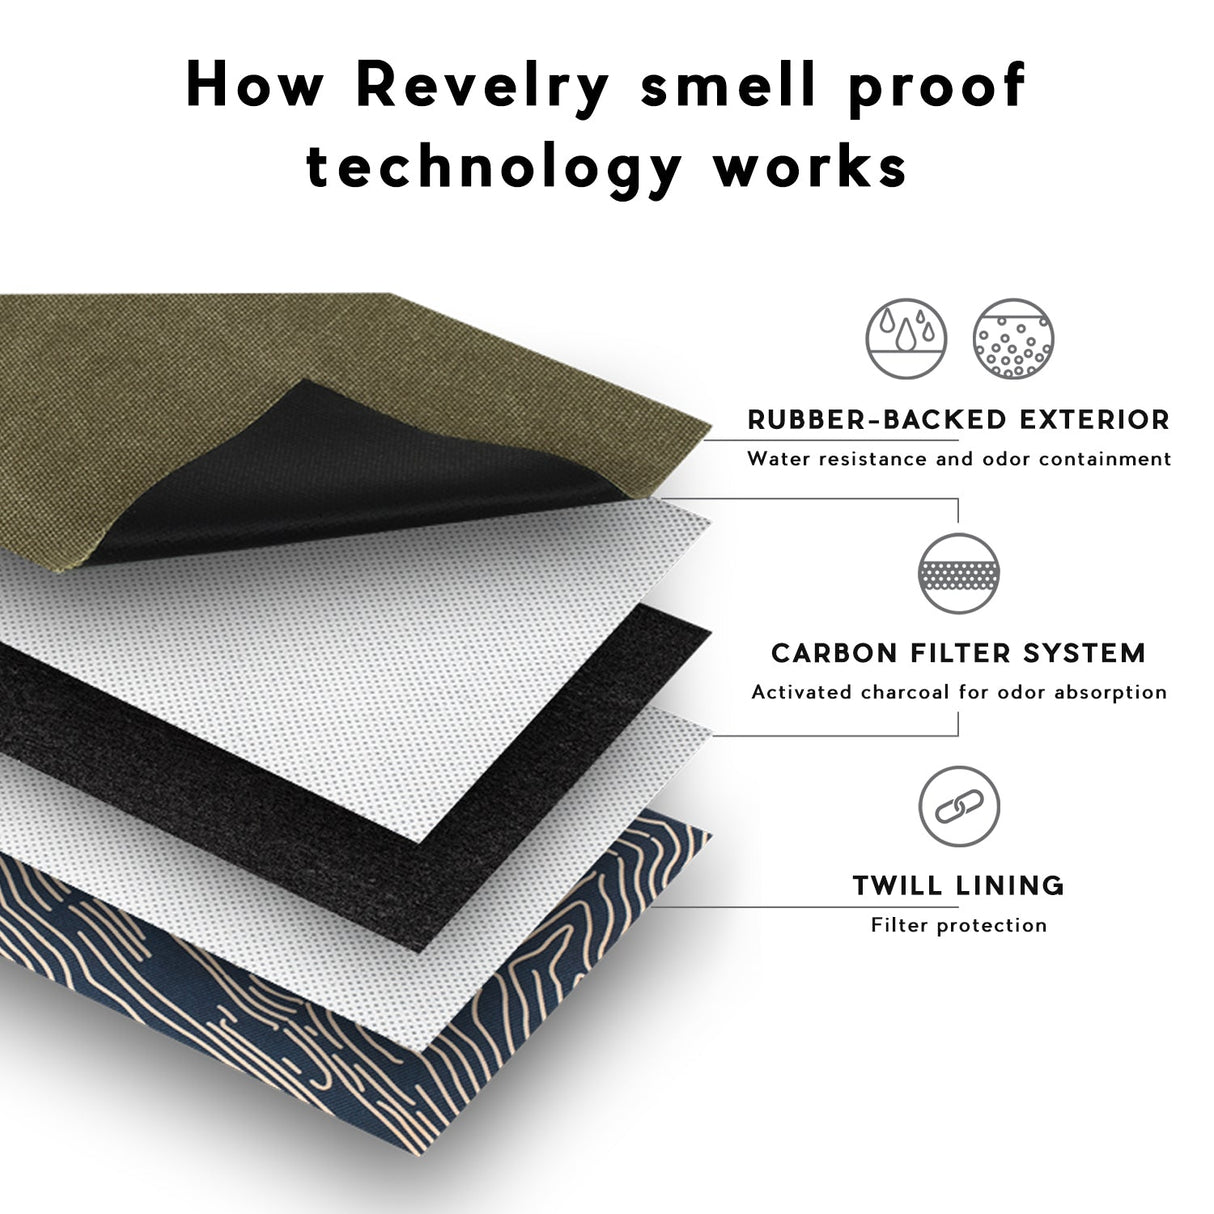 Revelry Supply Drifter Backpack materials showing rubber-backed exterior, carbon filter system, and twill lining.